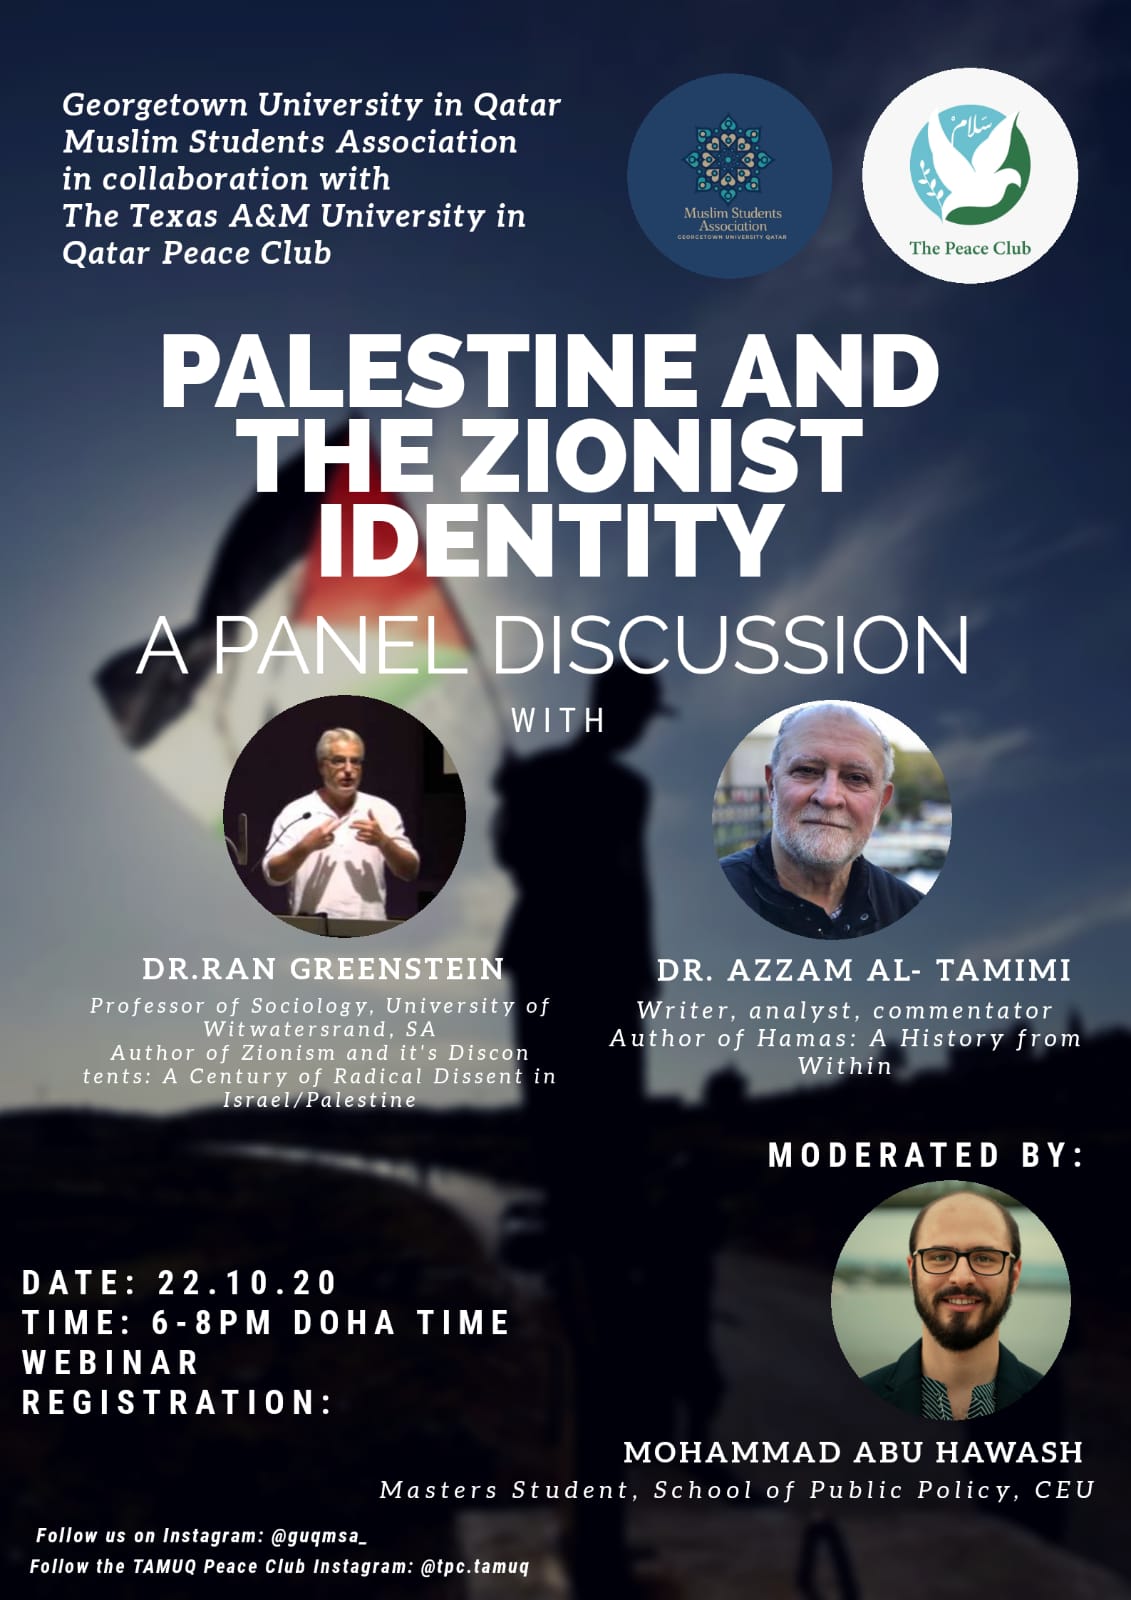 Panel discussion about Palestine and the Zionist Identity